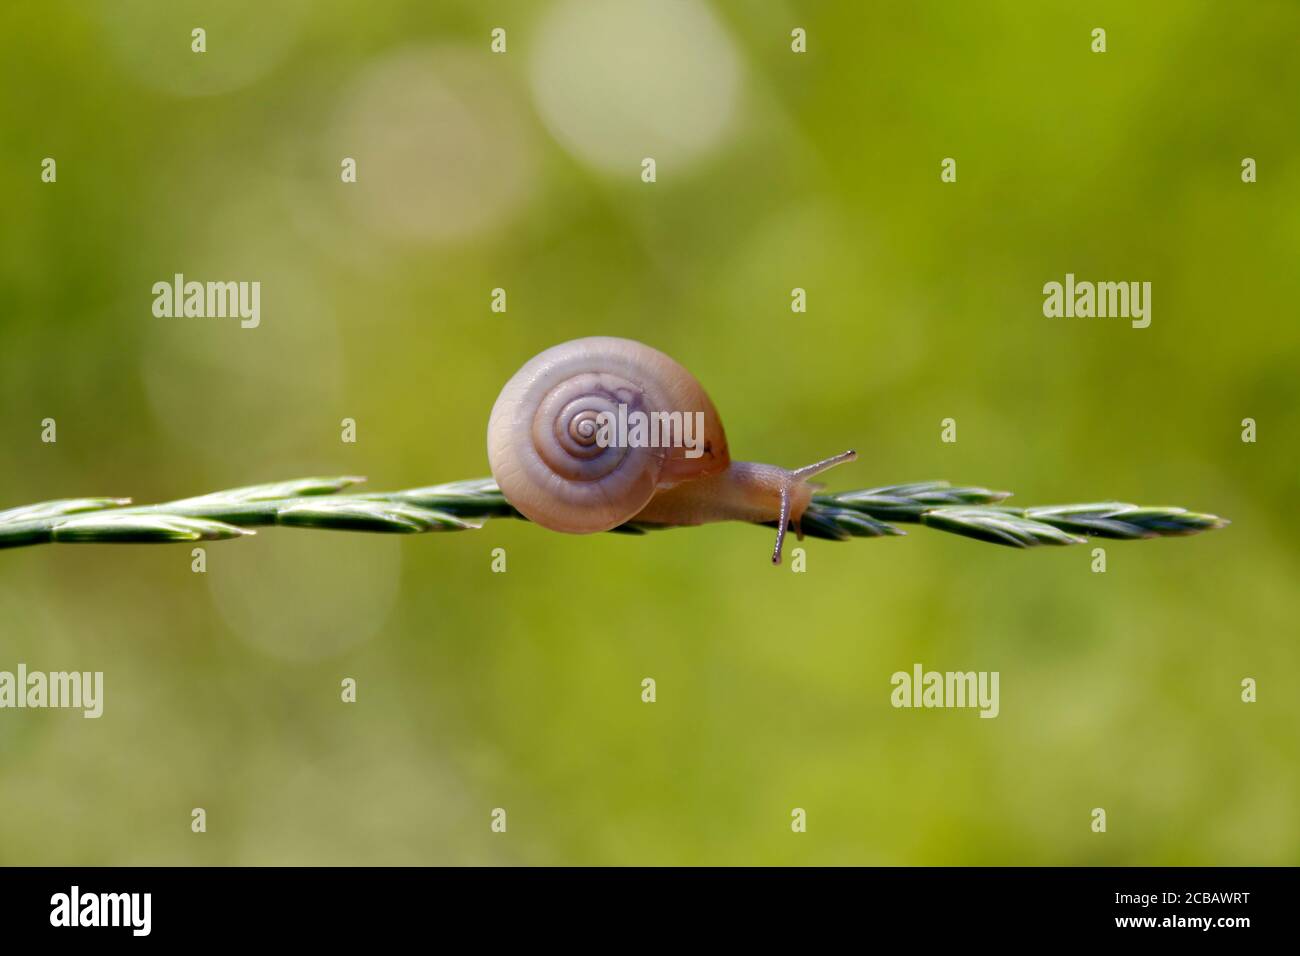 Snail crawls on a blade of grass Stock Photo